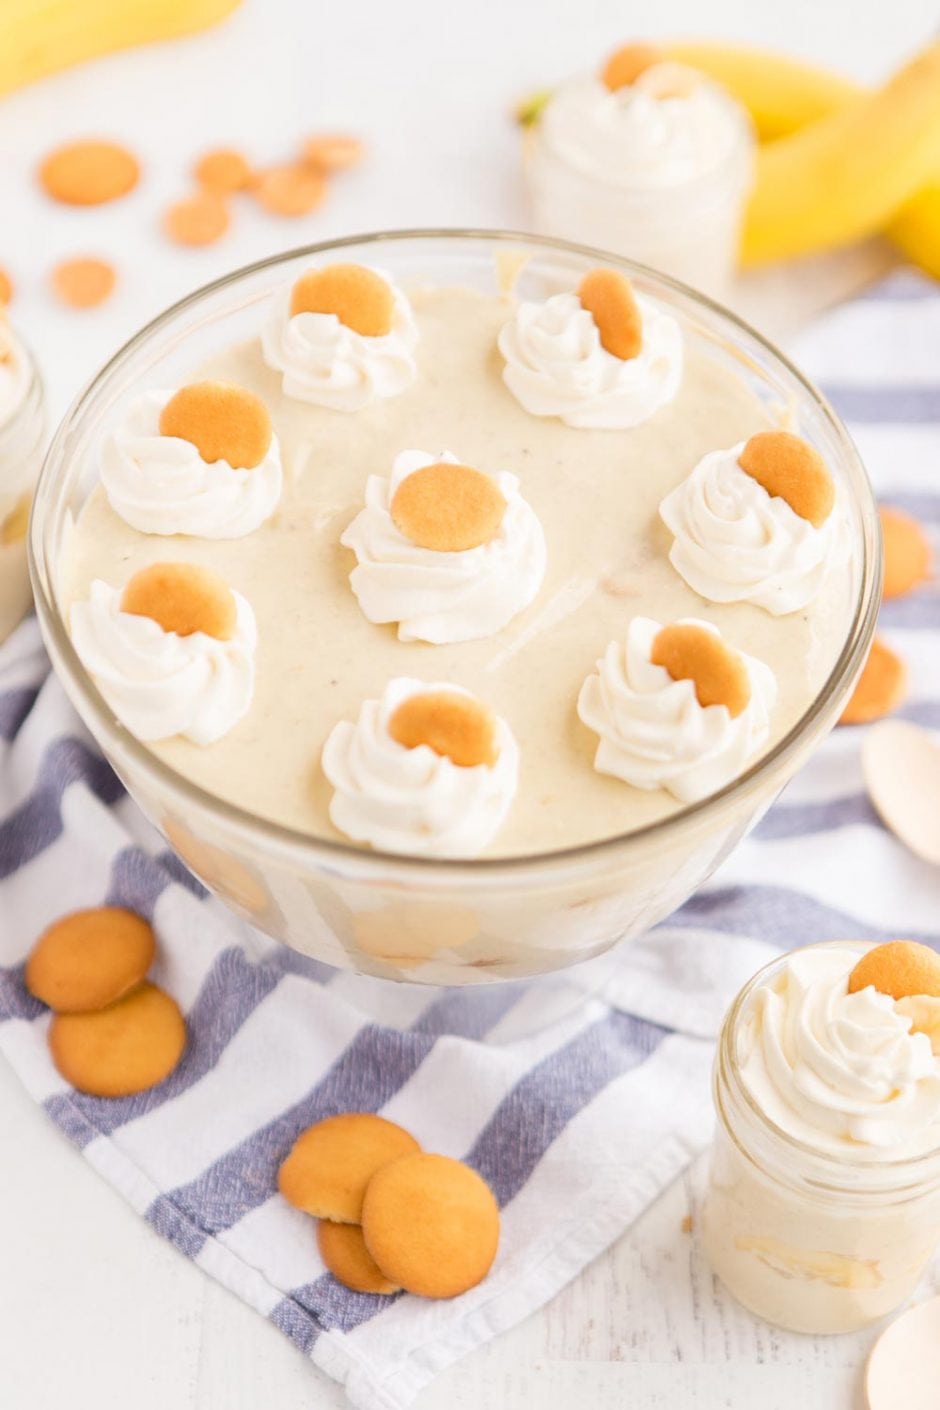 The banana pudding in a clear glass bowl.